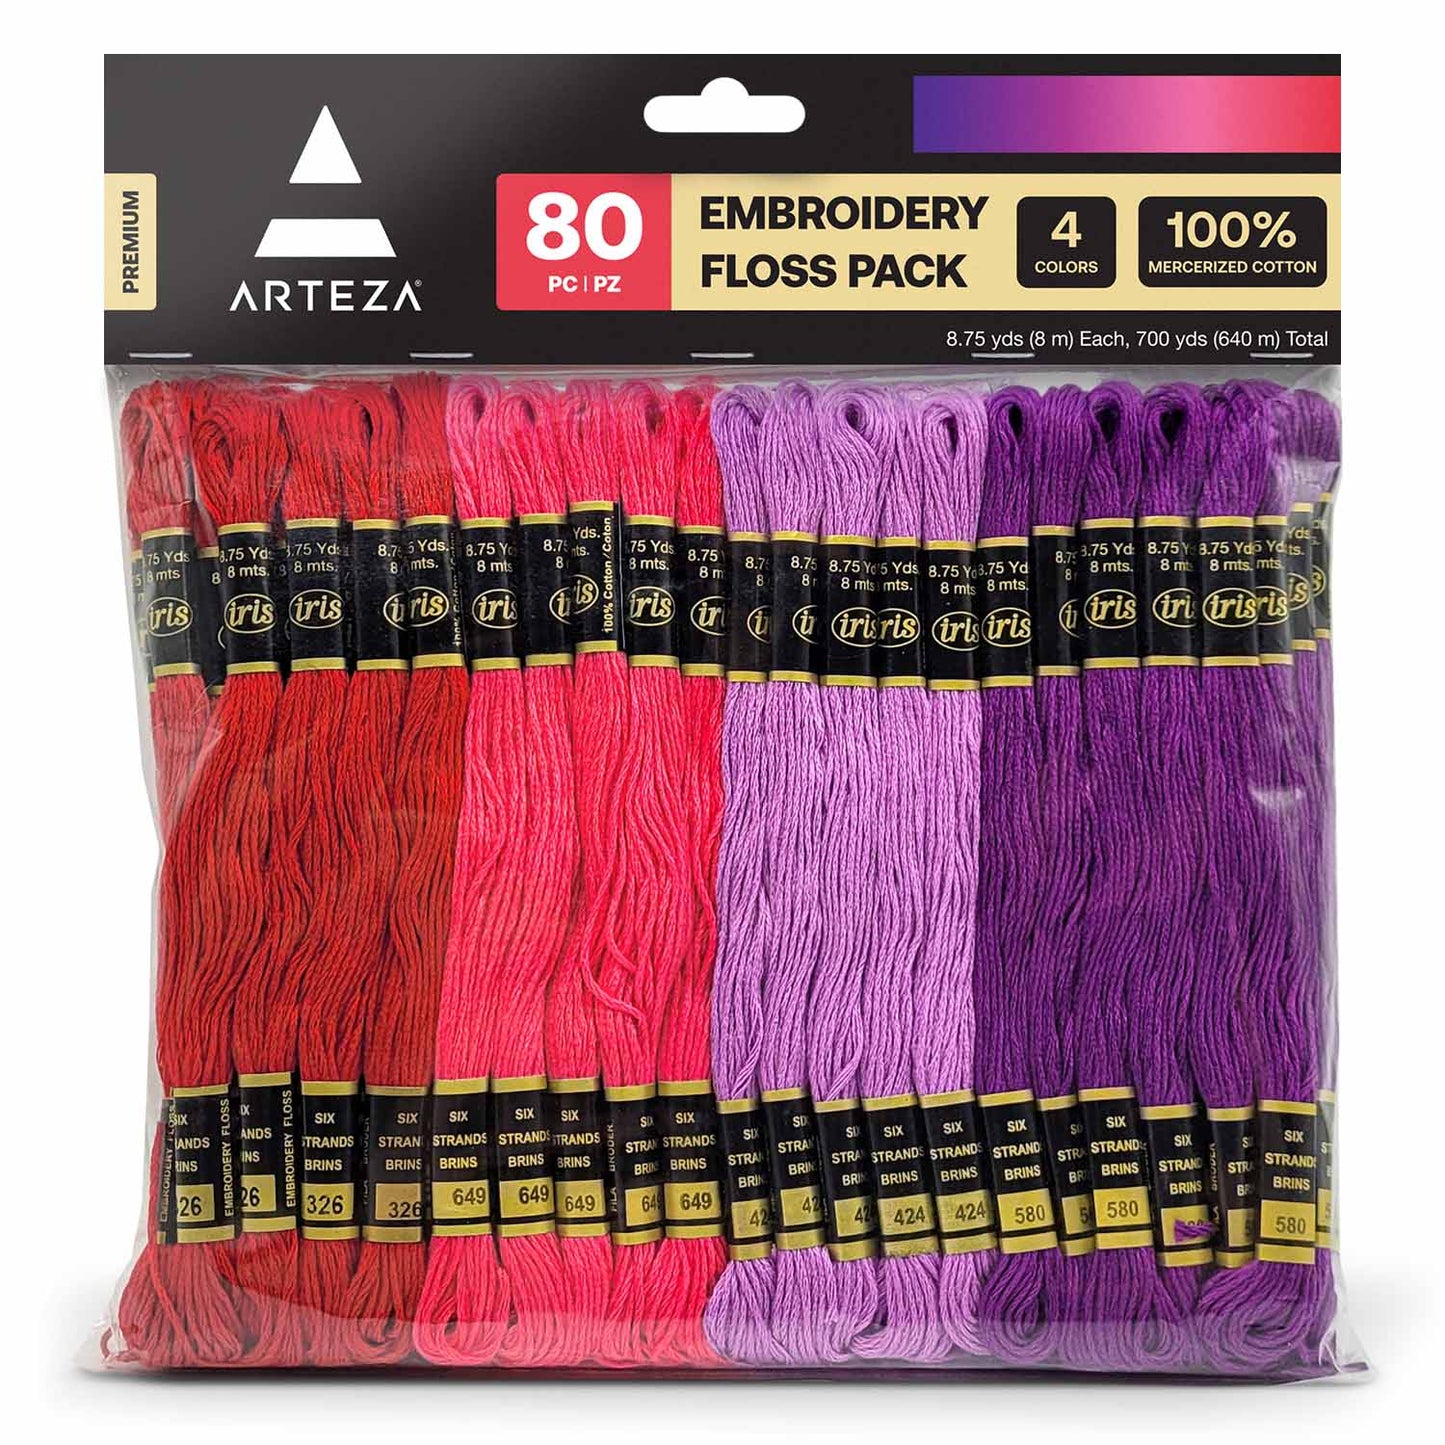 Arteza Embroidery Floss, Red, Pink, Purple & Violet Tones - 80 Pieces